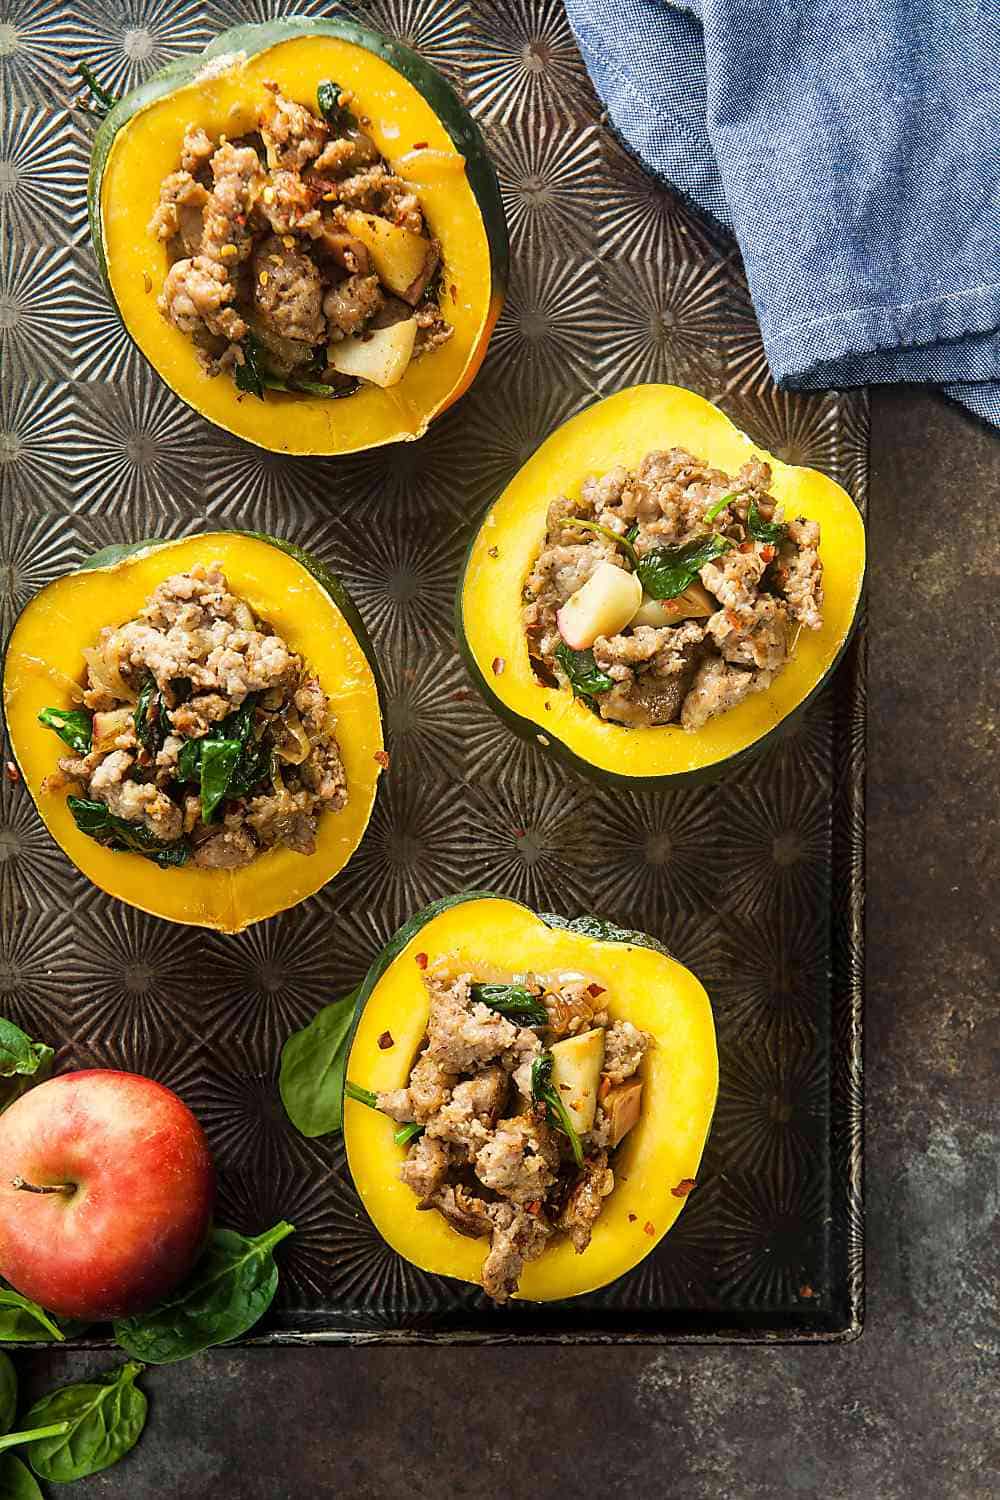 A tray of stuffed acorn squash with sausage and apples